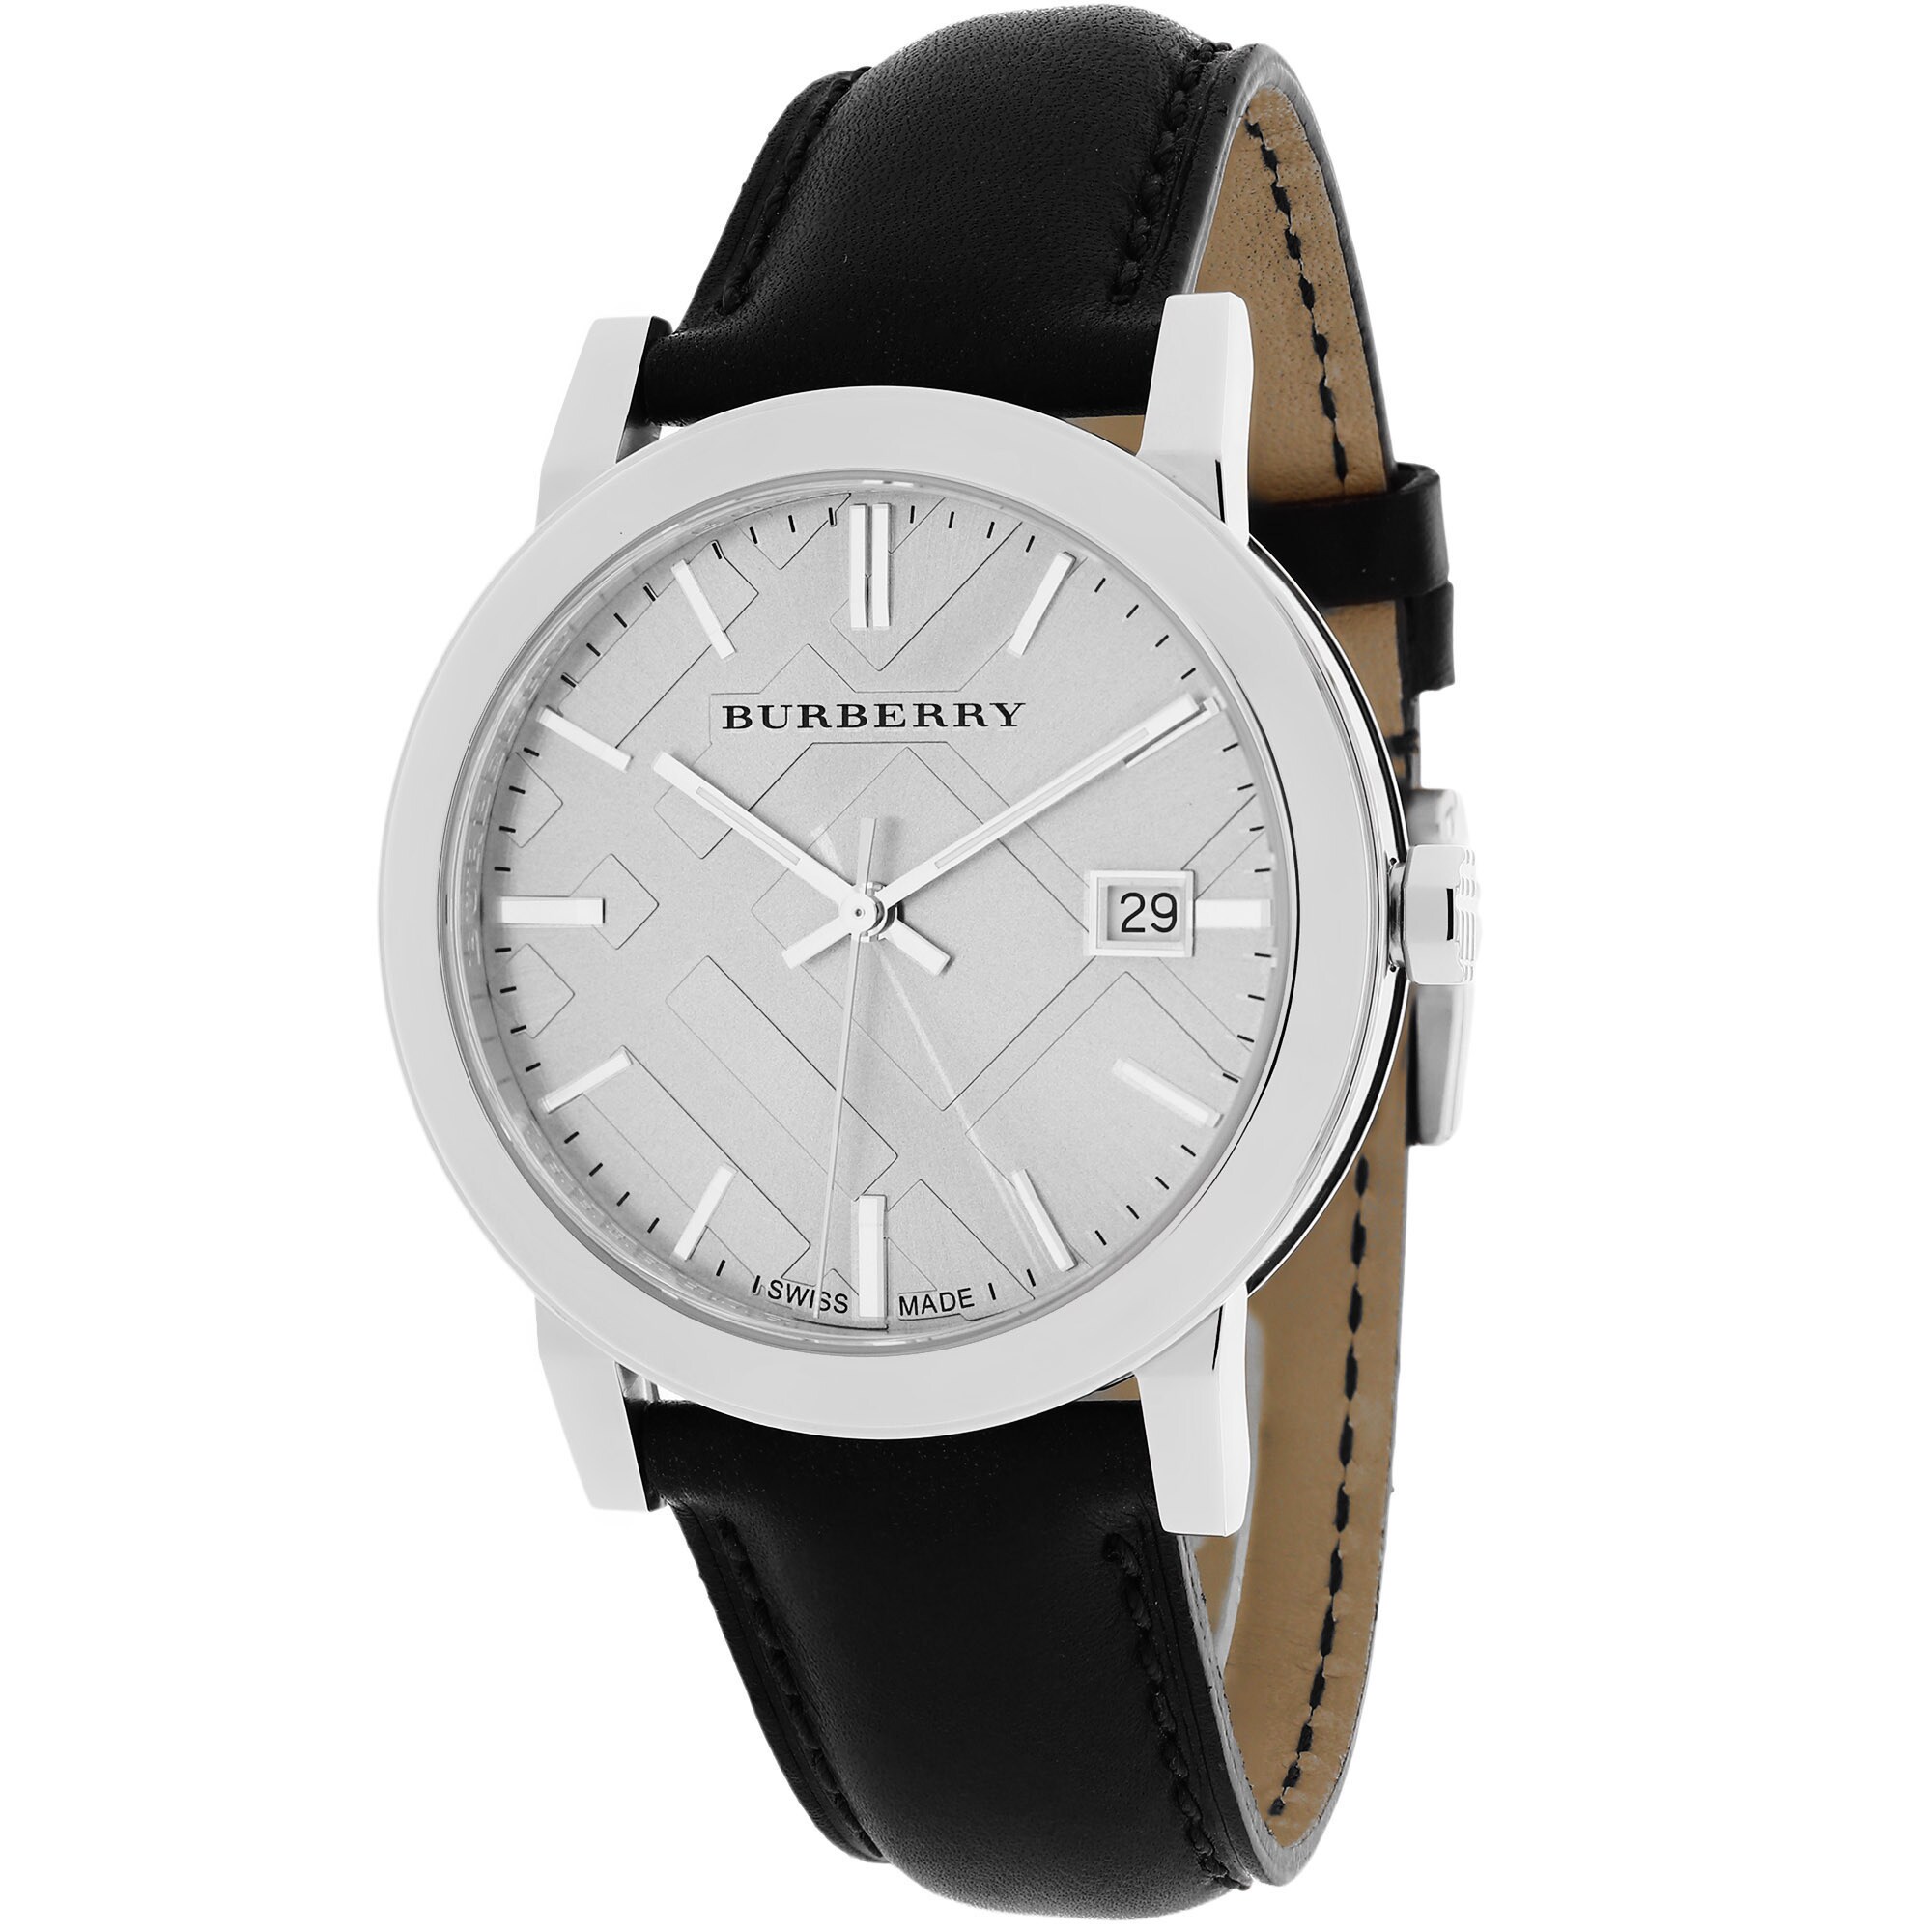 burberry watch men's leather strap